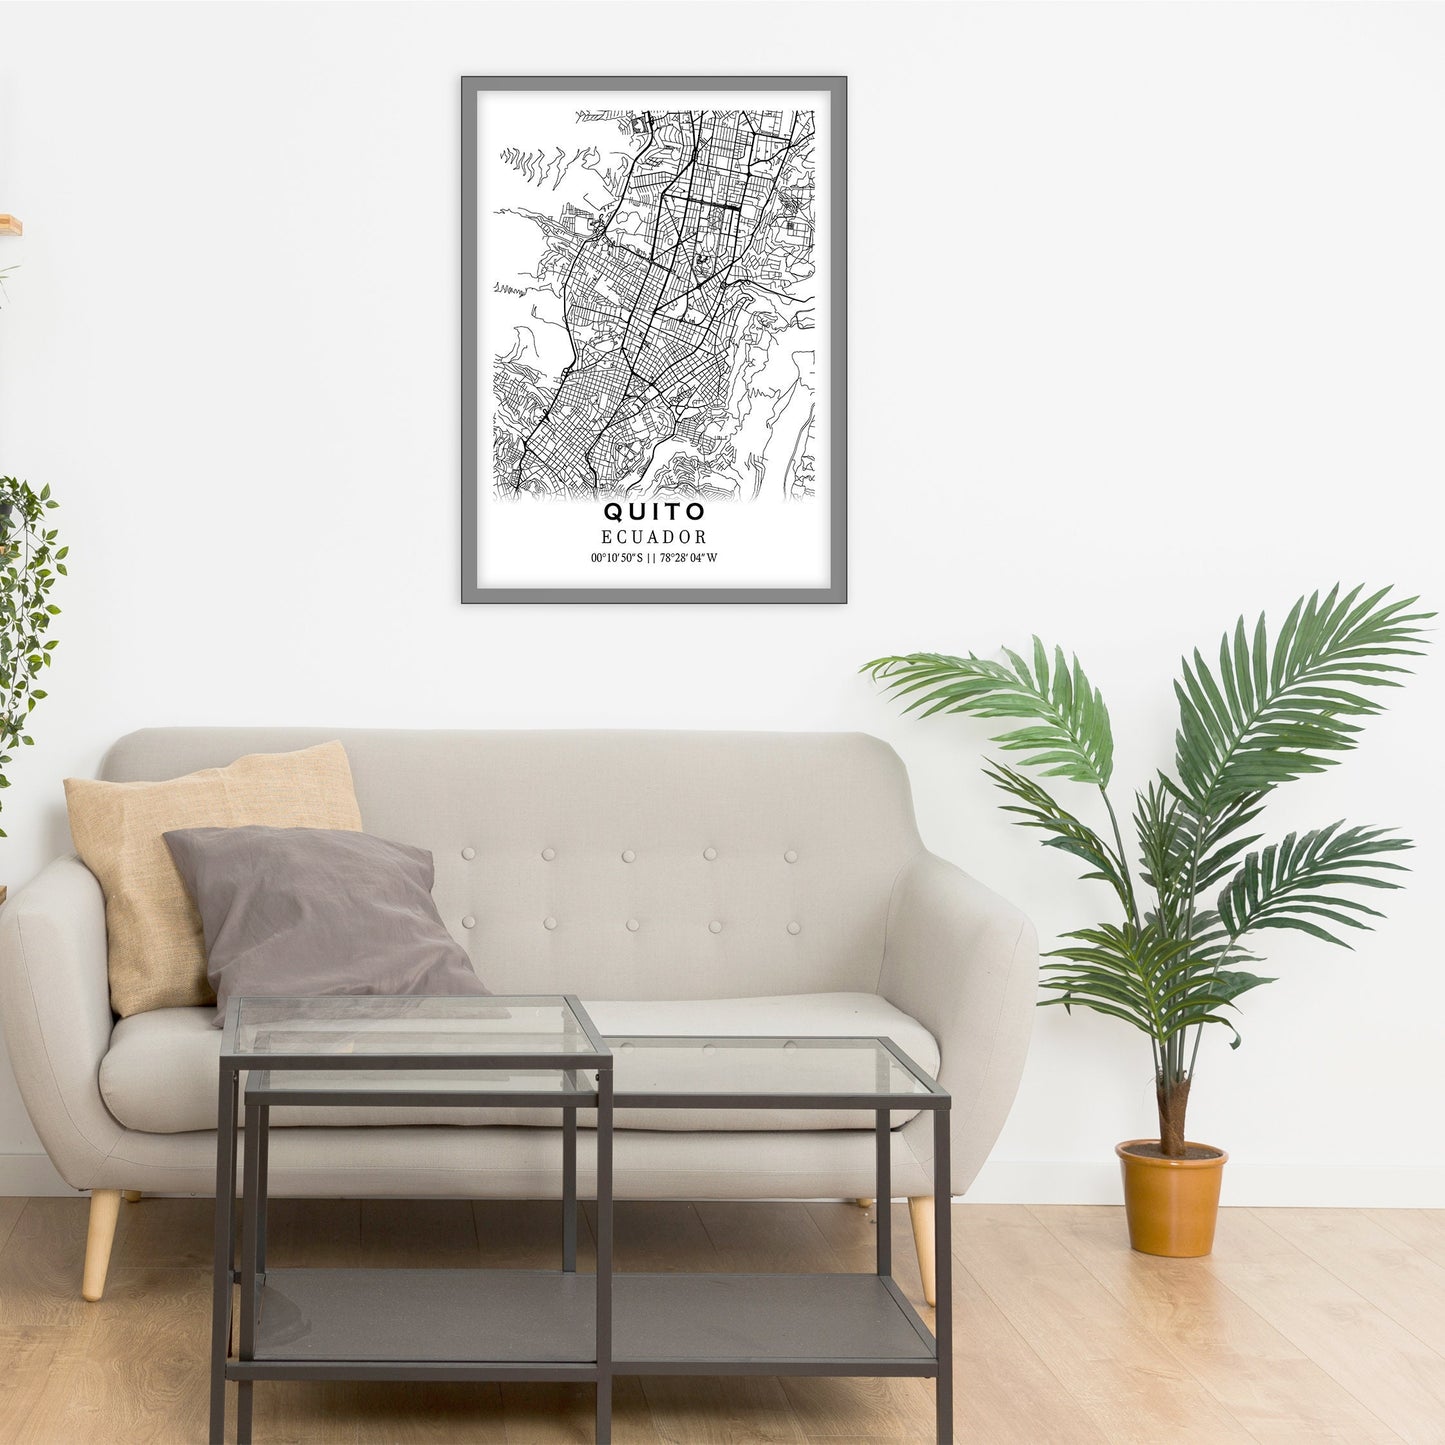 City map of QUITO - Home Decor - Wall decor - Office map - Travel map - Print map - Poster city map - Quito map - Map art - Ecuador